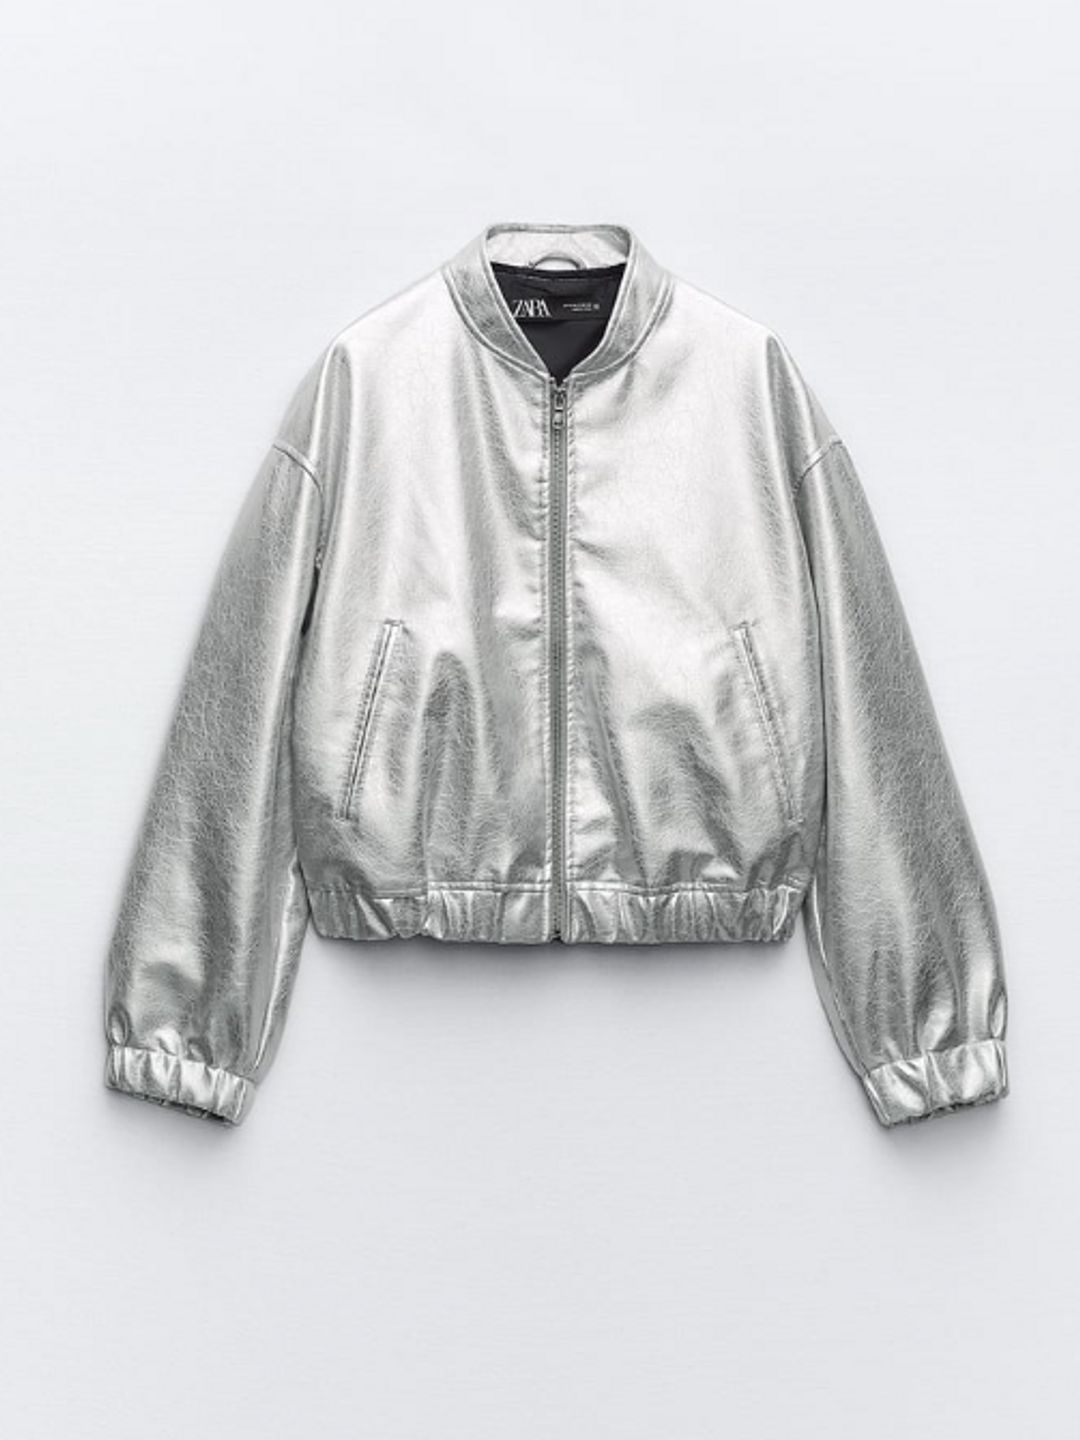 15 bomber jackets to add into your cool-girl uniform | HELLO!